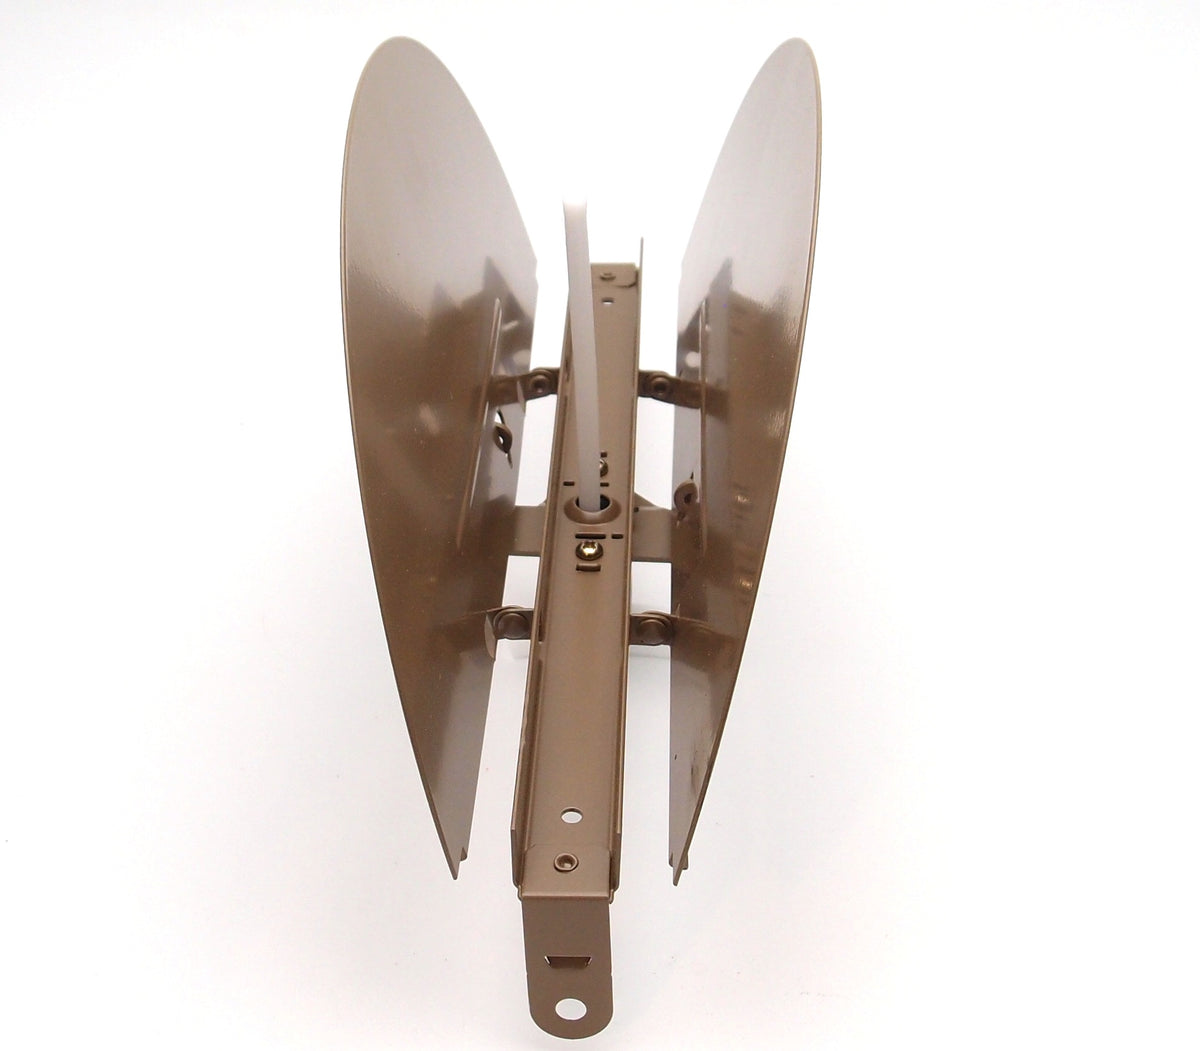 8&quot; BUTTERFLY DAMPER - Control Your Airflow on drop ceiling grilles of 24x24 (8&quot; round duct opening)